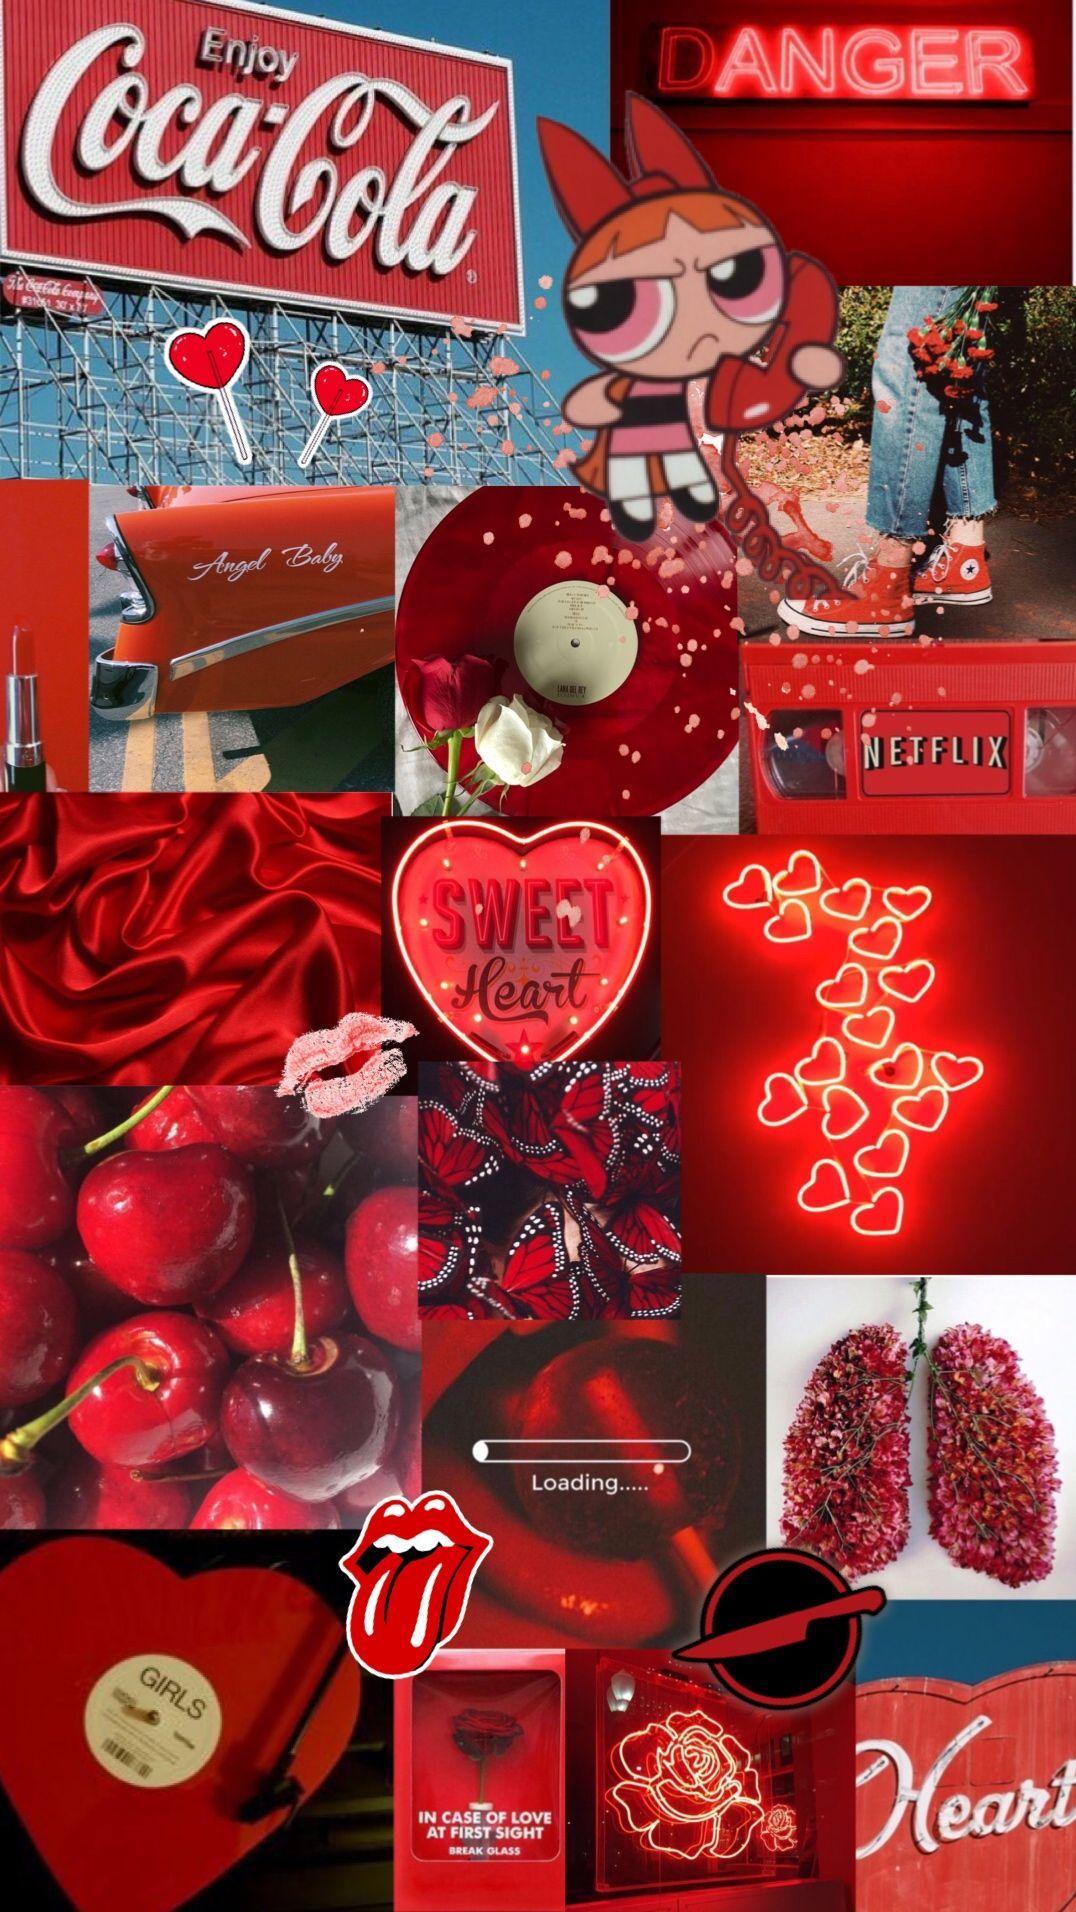 84 Wallpaper Cute Aesthetic Red Images & Pictures - MyWeb